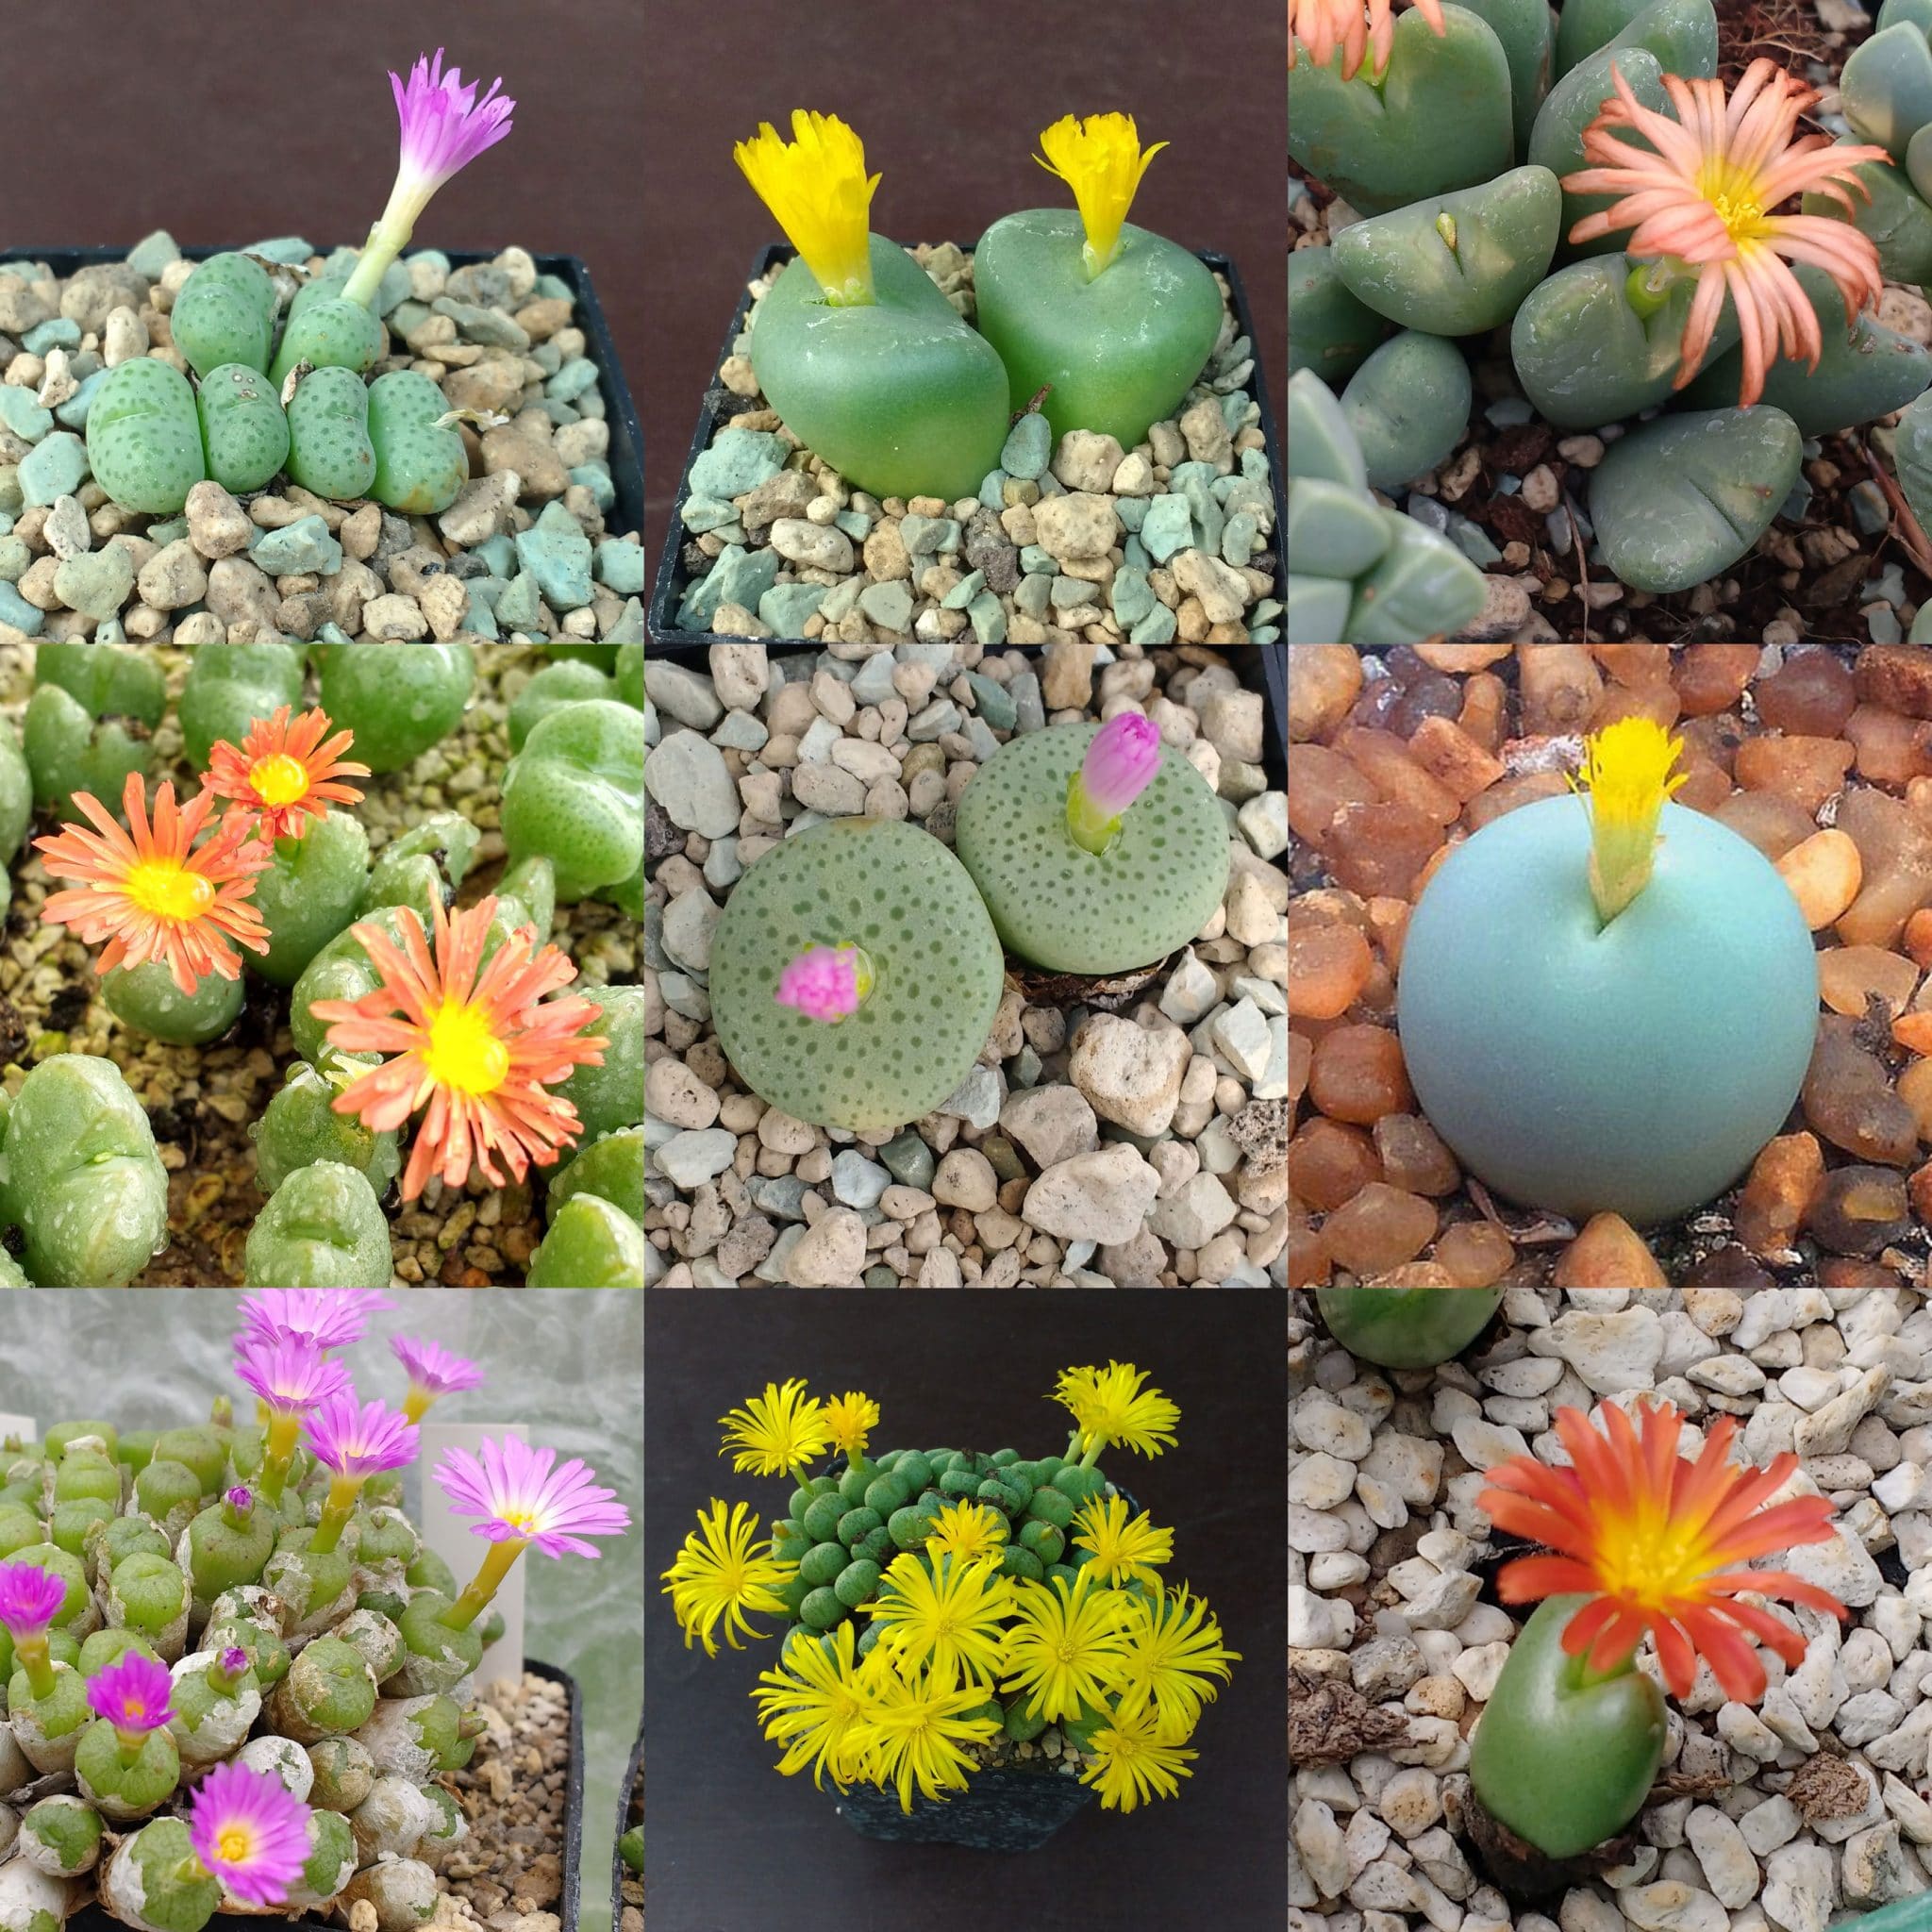 CONOPHYTUM  MIX succulent cactus mixed living stones rocks plant seed 50 SEEDS 